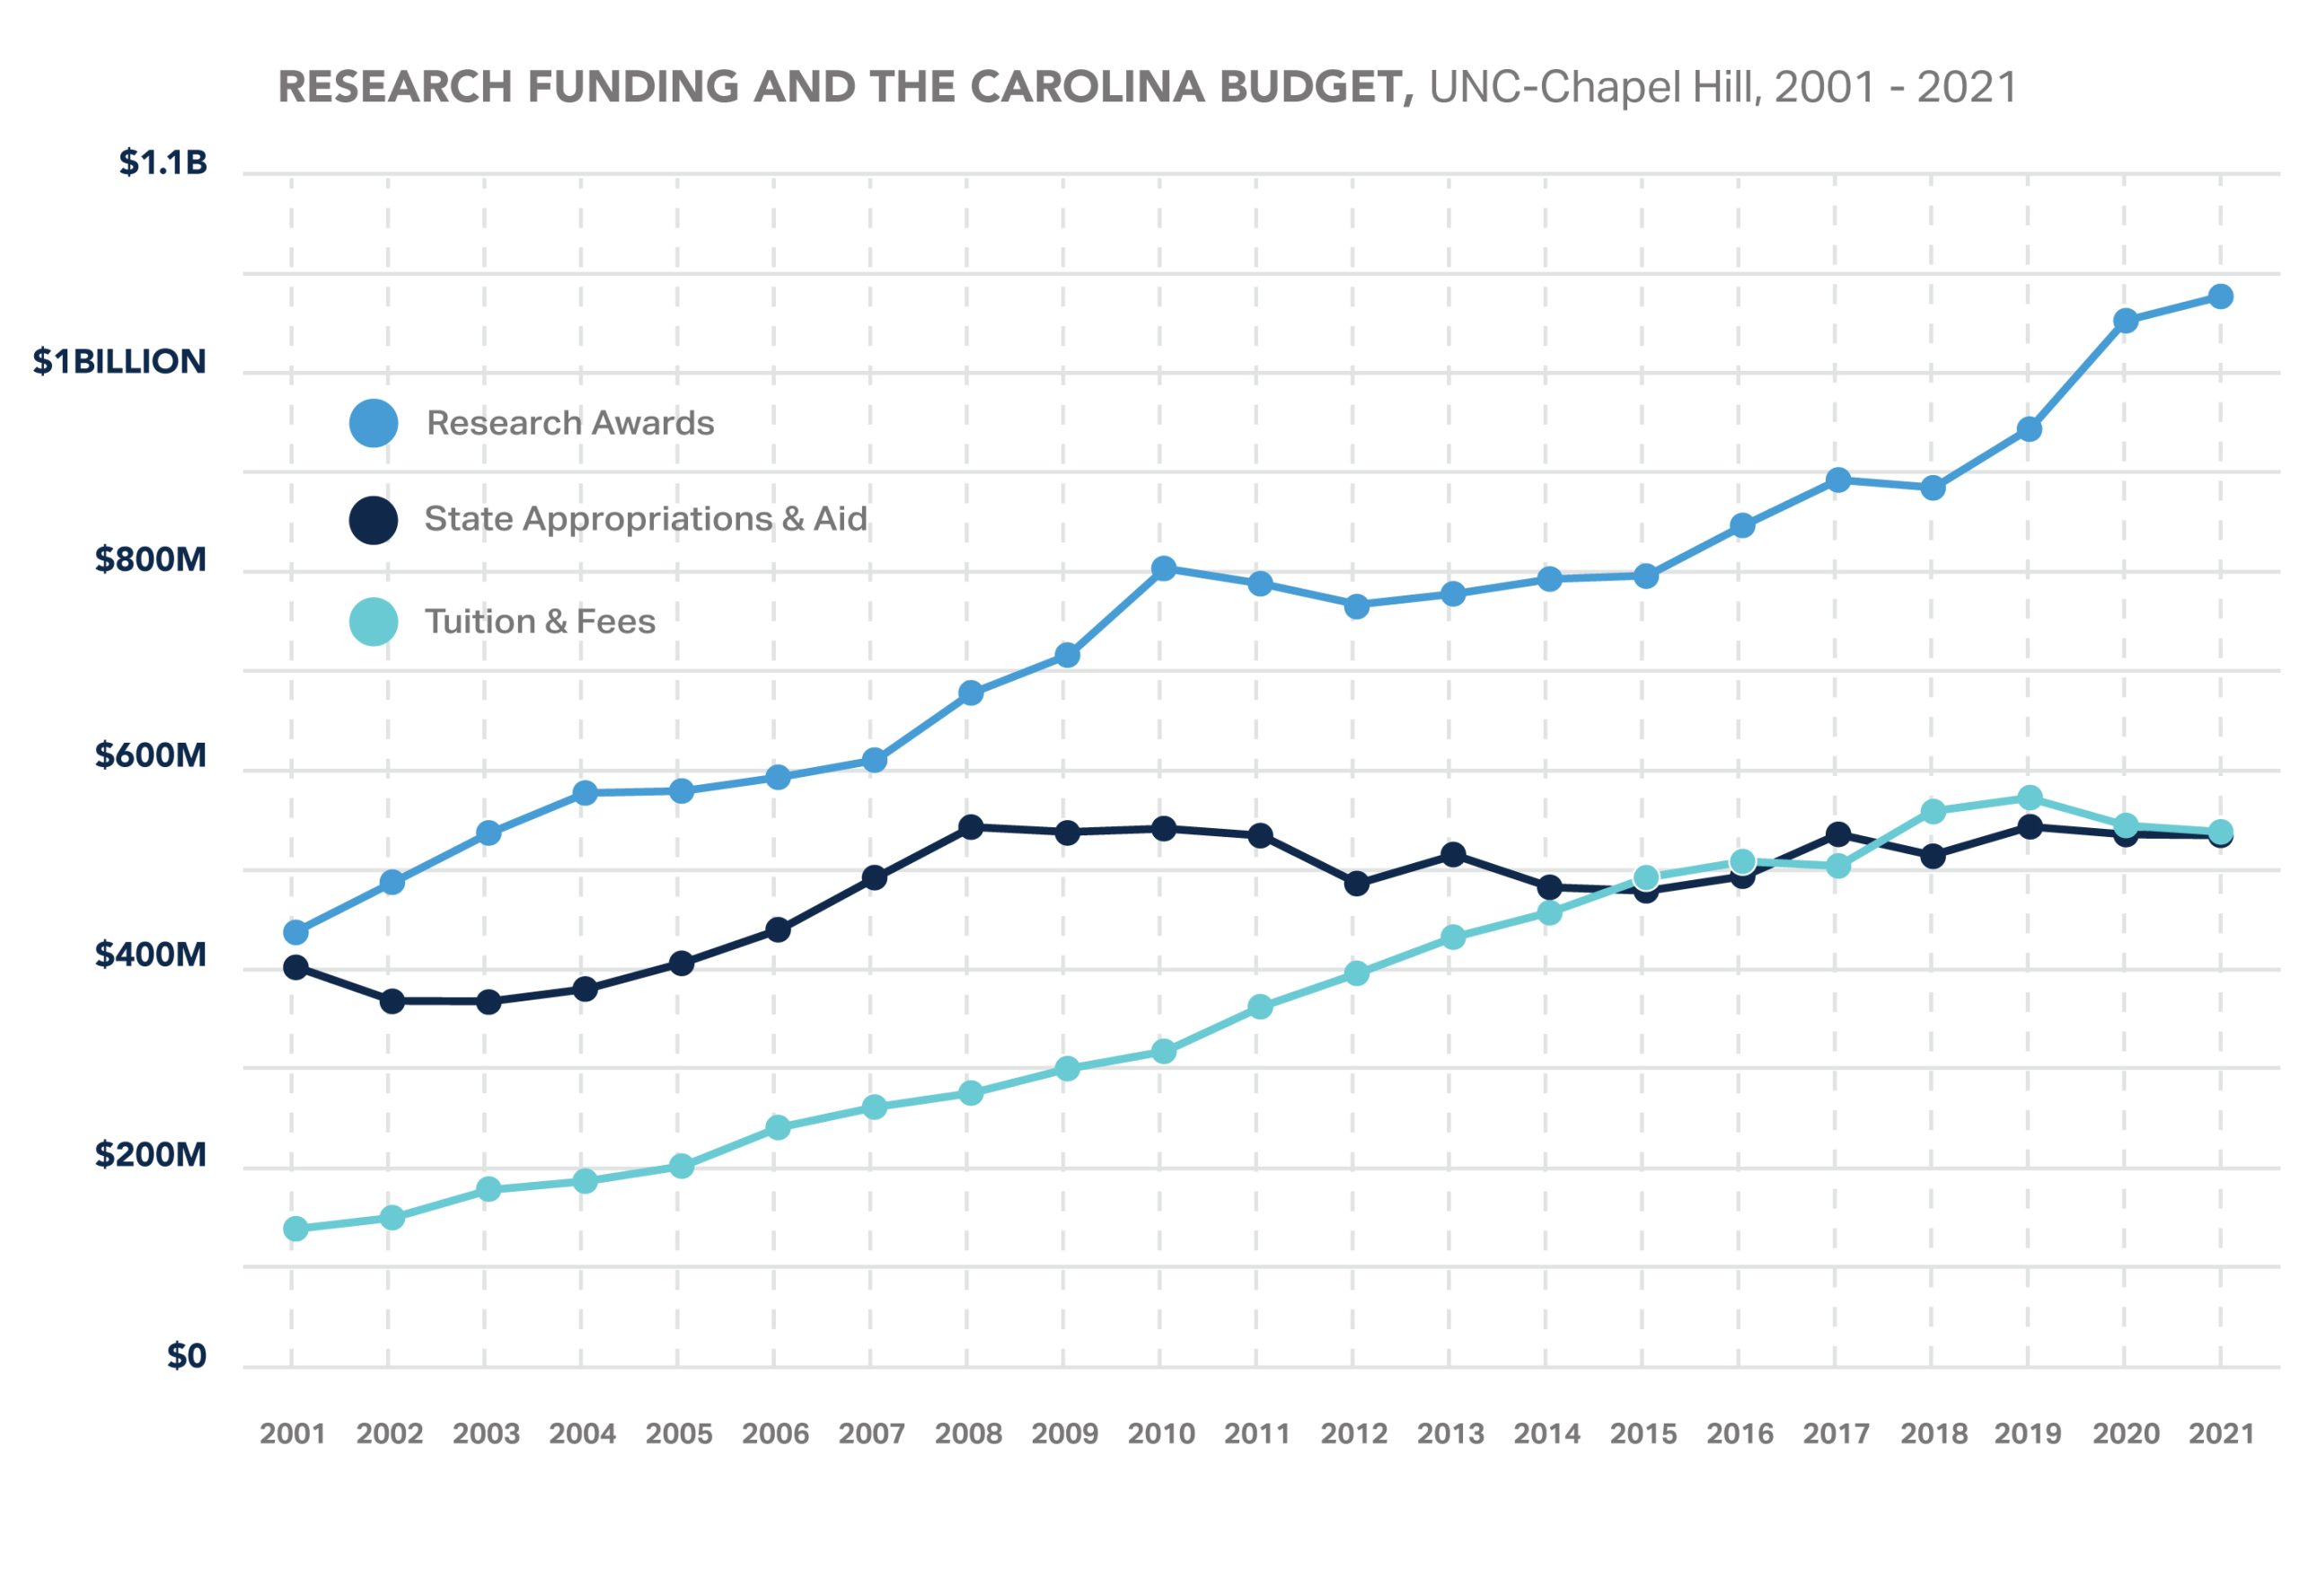 Line graph showing research funding and the Carolina budget for research awards, state appropriations and aid, and tuition and fees. Research Awards in 2021 was $1,073,632,927, State Appropriations and Aid was $537,409,000, and Tuition and Fees was $533,991,39.